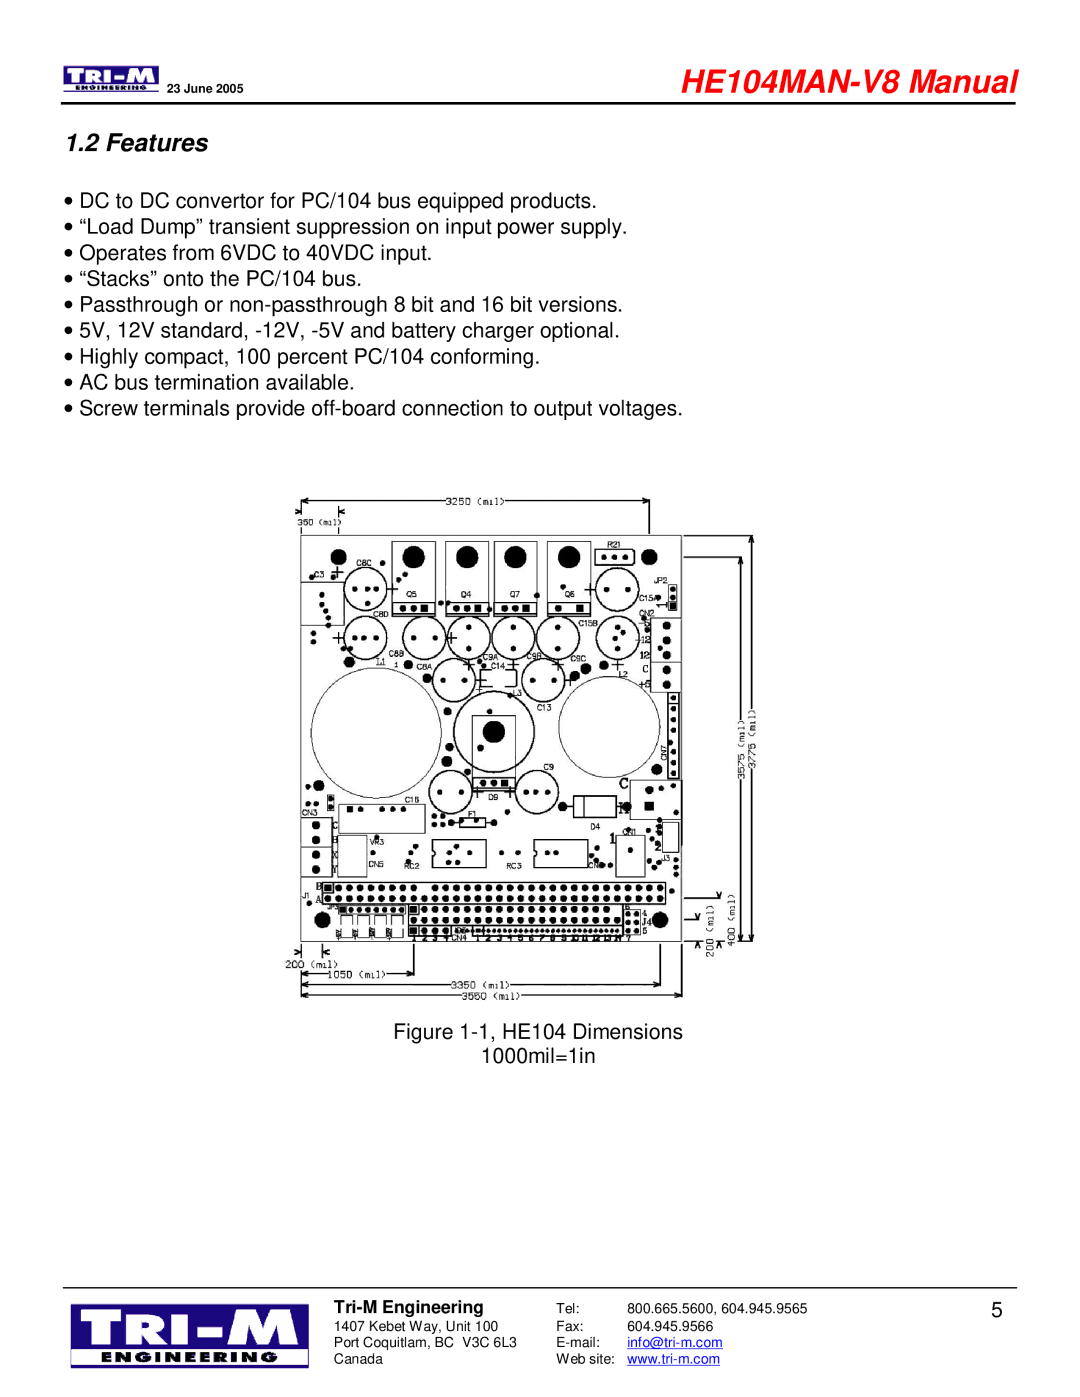 Tri-M Systems technical manual Features, HE104 Dimensions 1000mil=1in 